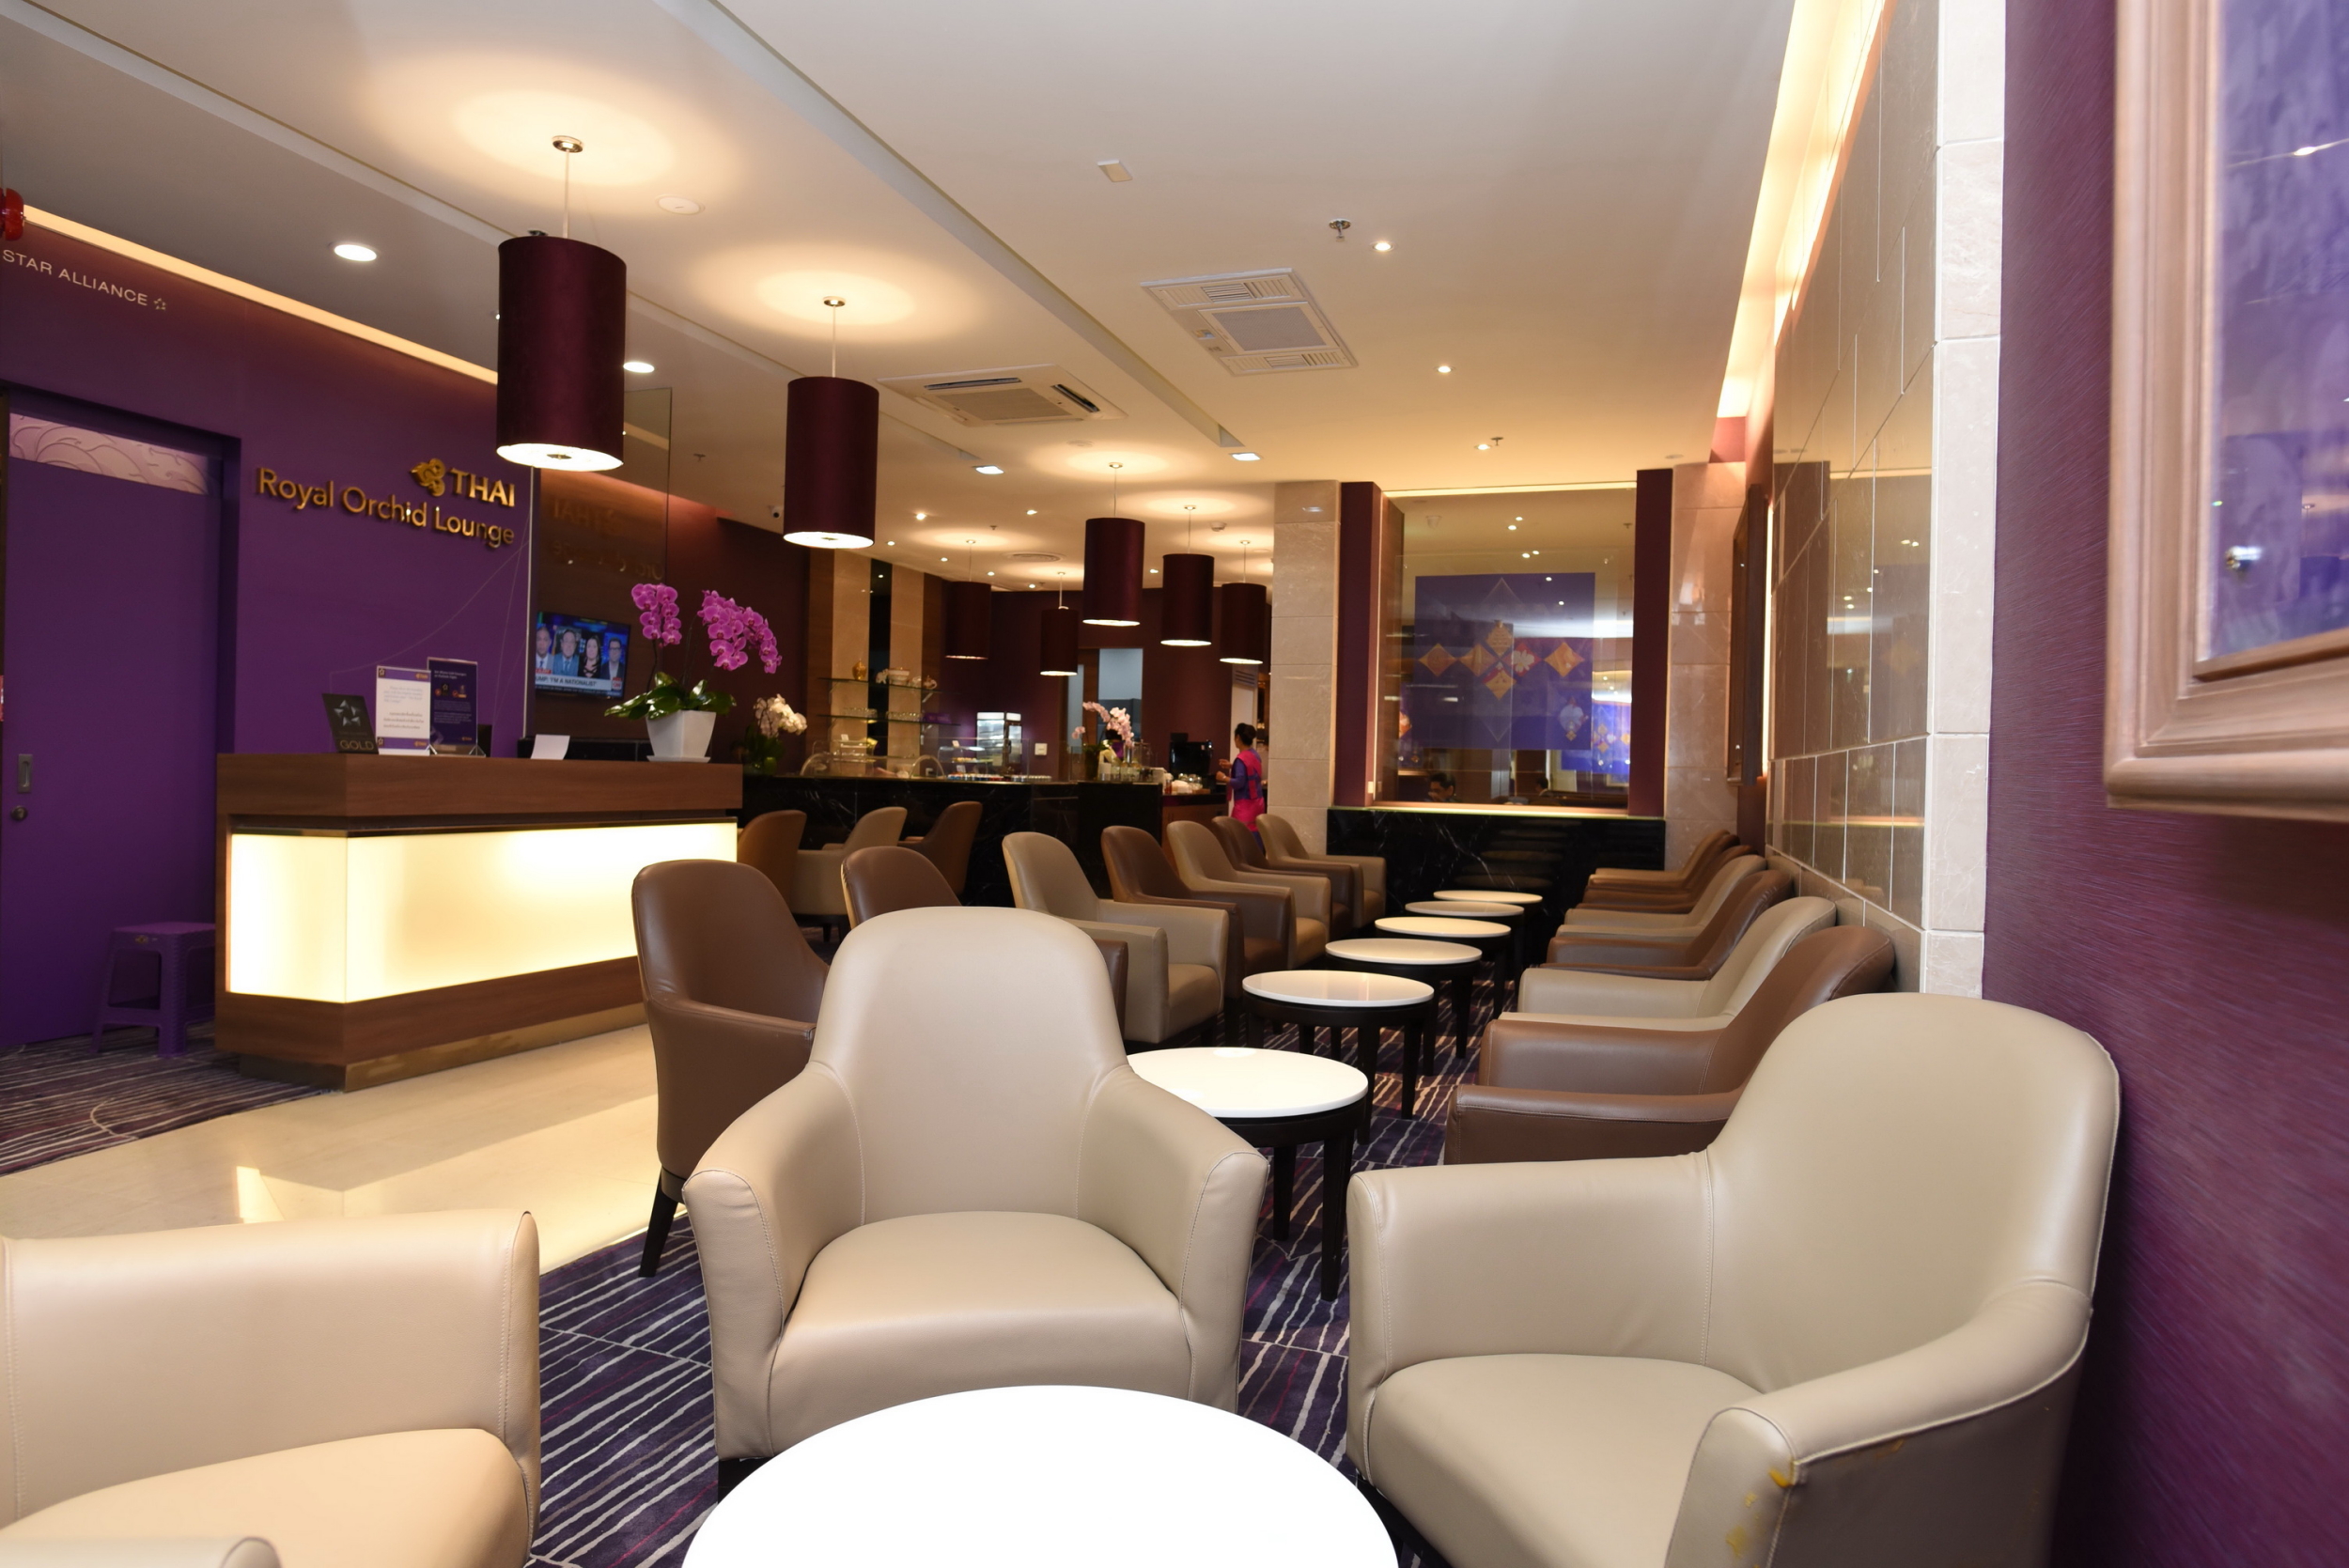 Thai Airways has completed the renovation of its Royal Orchid Lounge in the Domestic Terminal at Chiang Mai International Airport. Located near Departure Gate 3, Thai Airways’ 147-sqm Royal Orchid Lounge was designed to reflect Thai and Lanna culture. Click to enlarge.